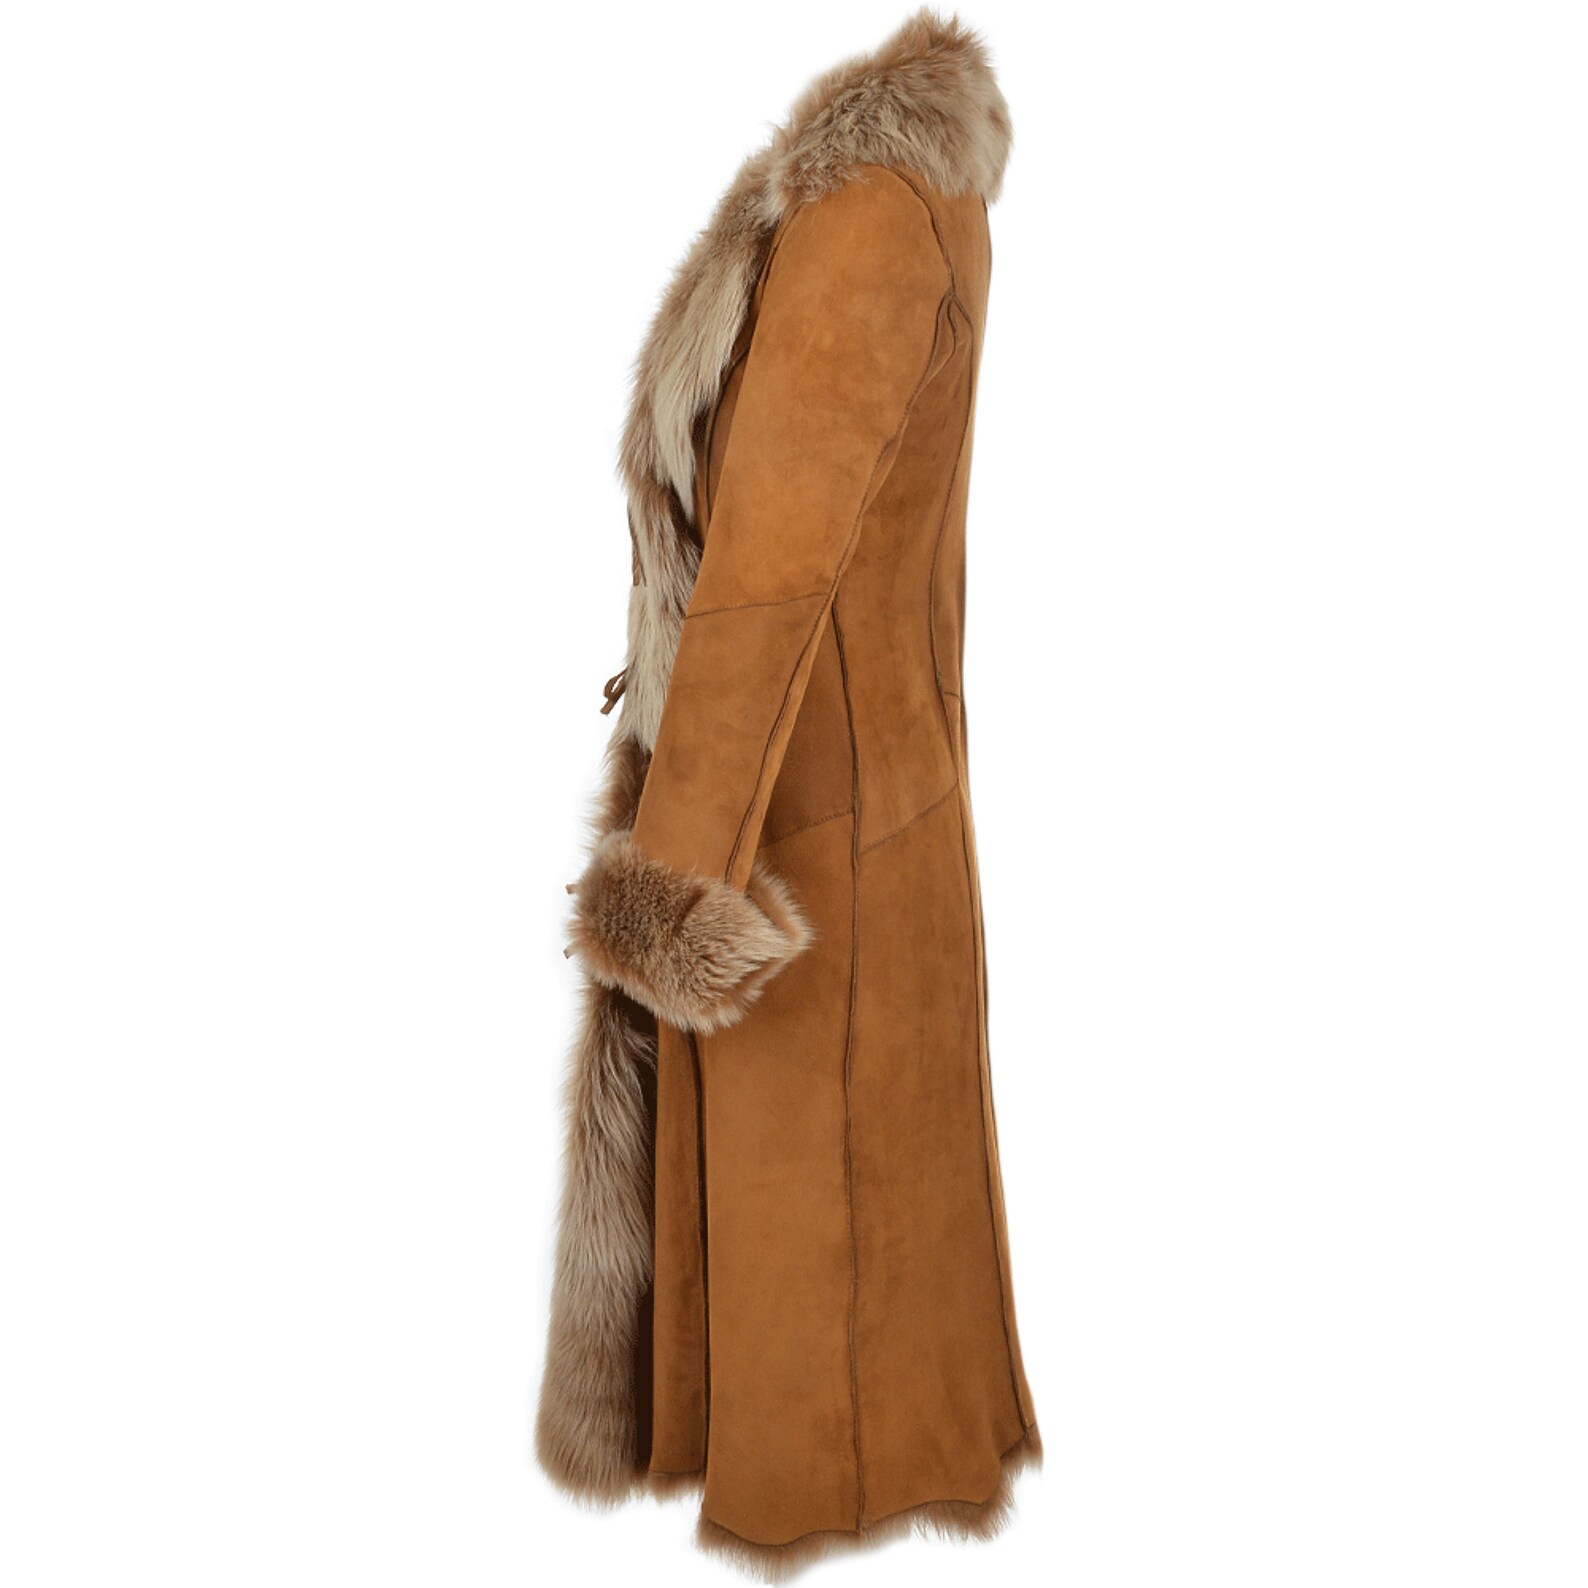 Women's Shearling Coat in Genuine Suede Leather/ Vintage - Etsy